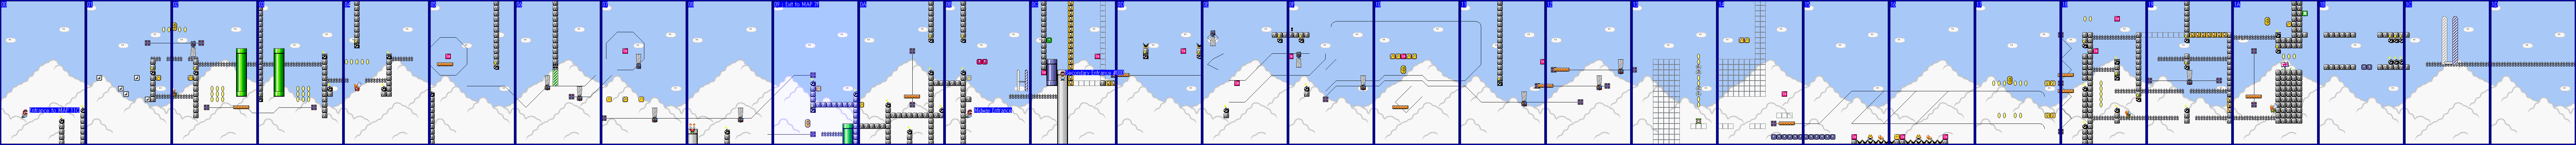 MAP_11C.png